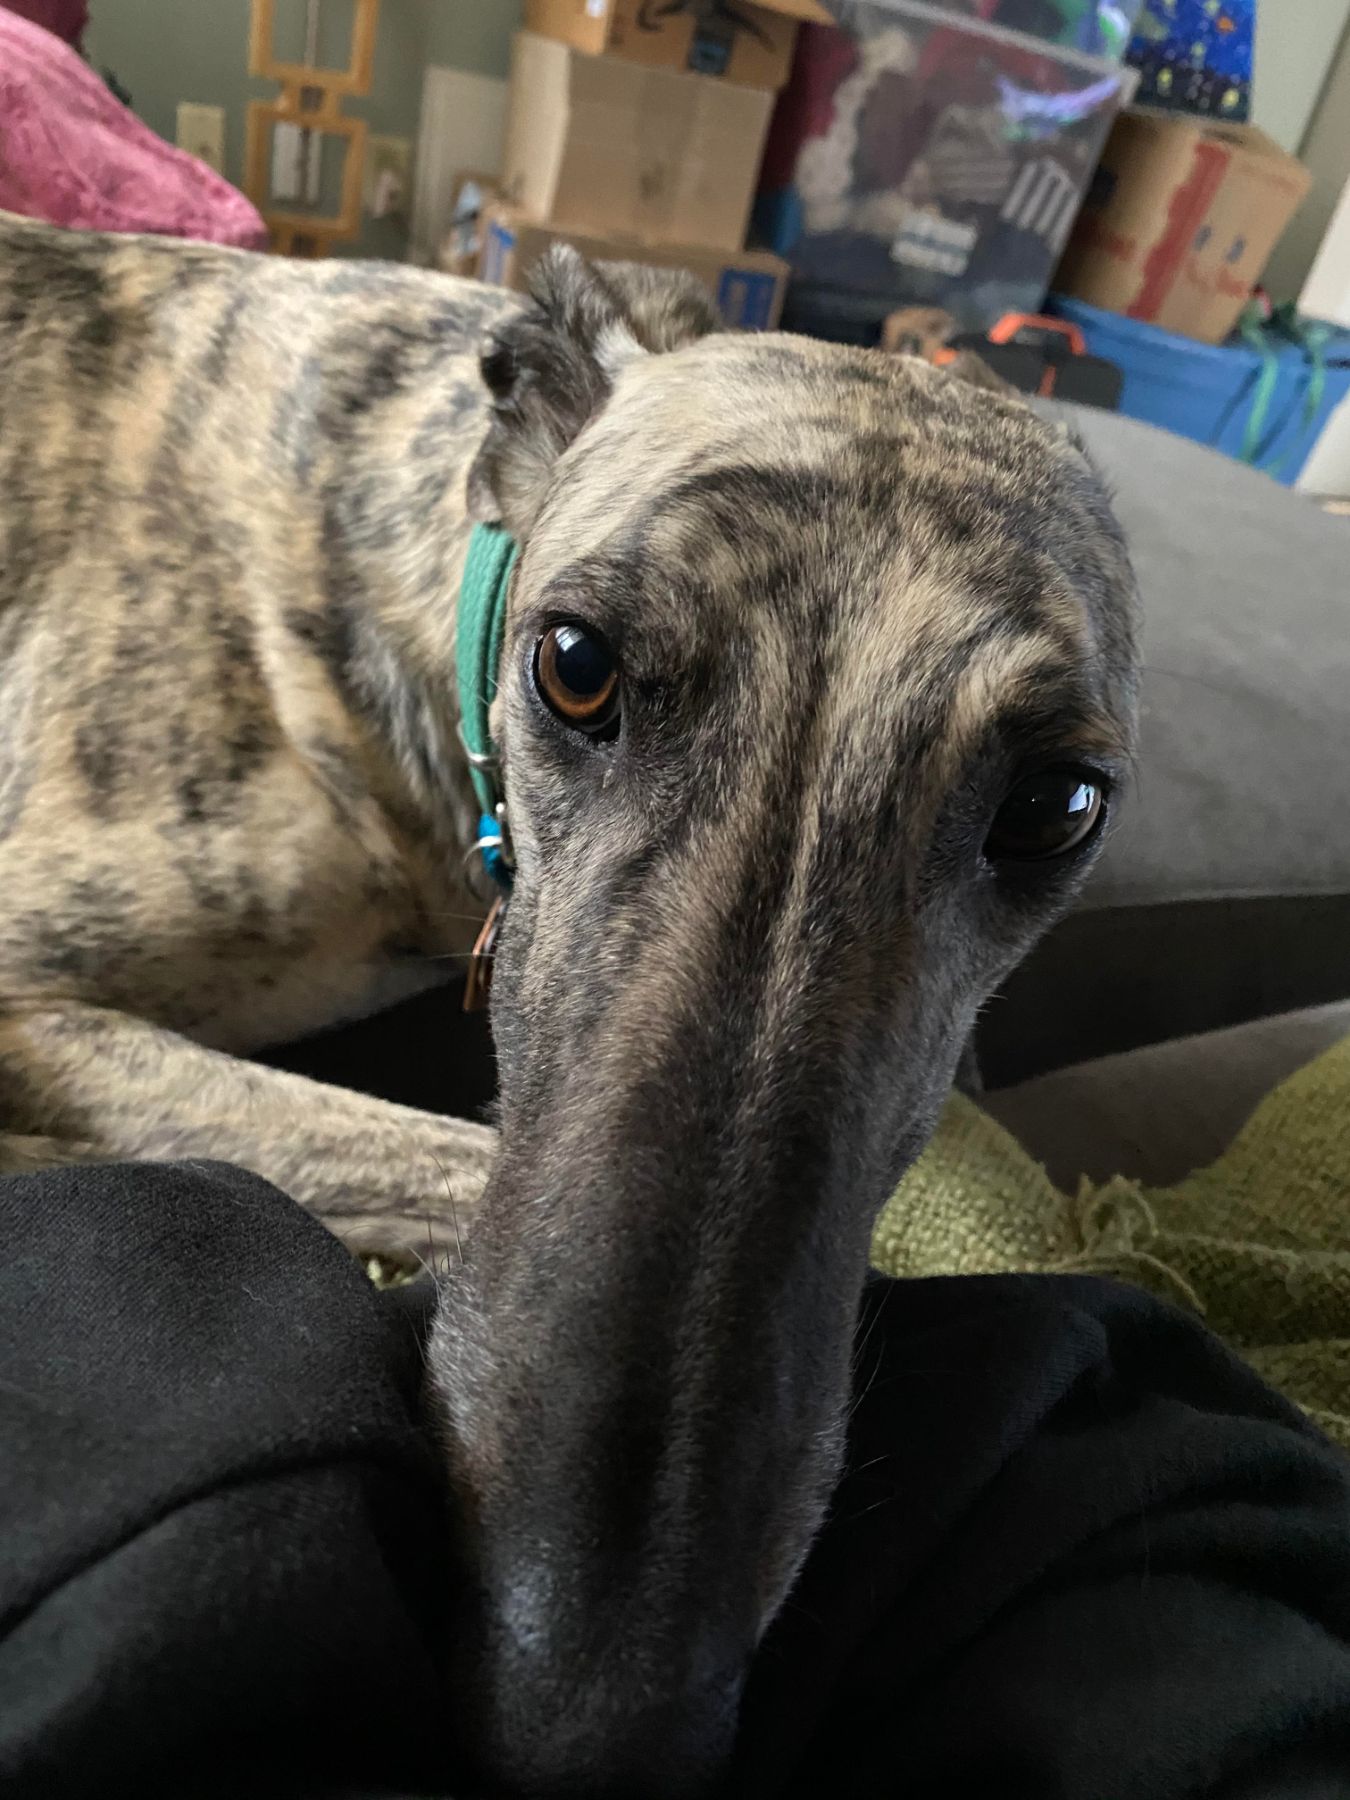 Joker, greyhound, laying on a couch